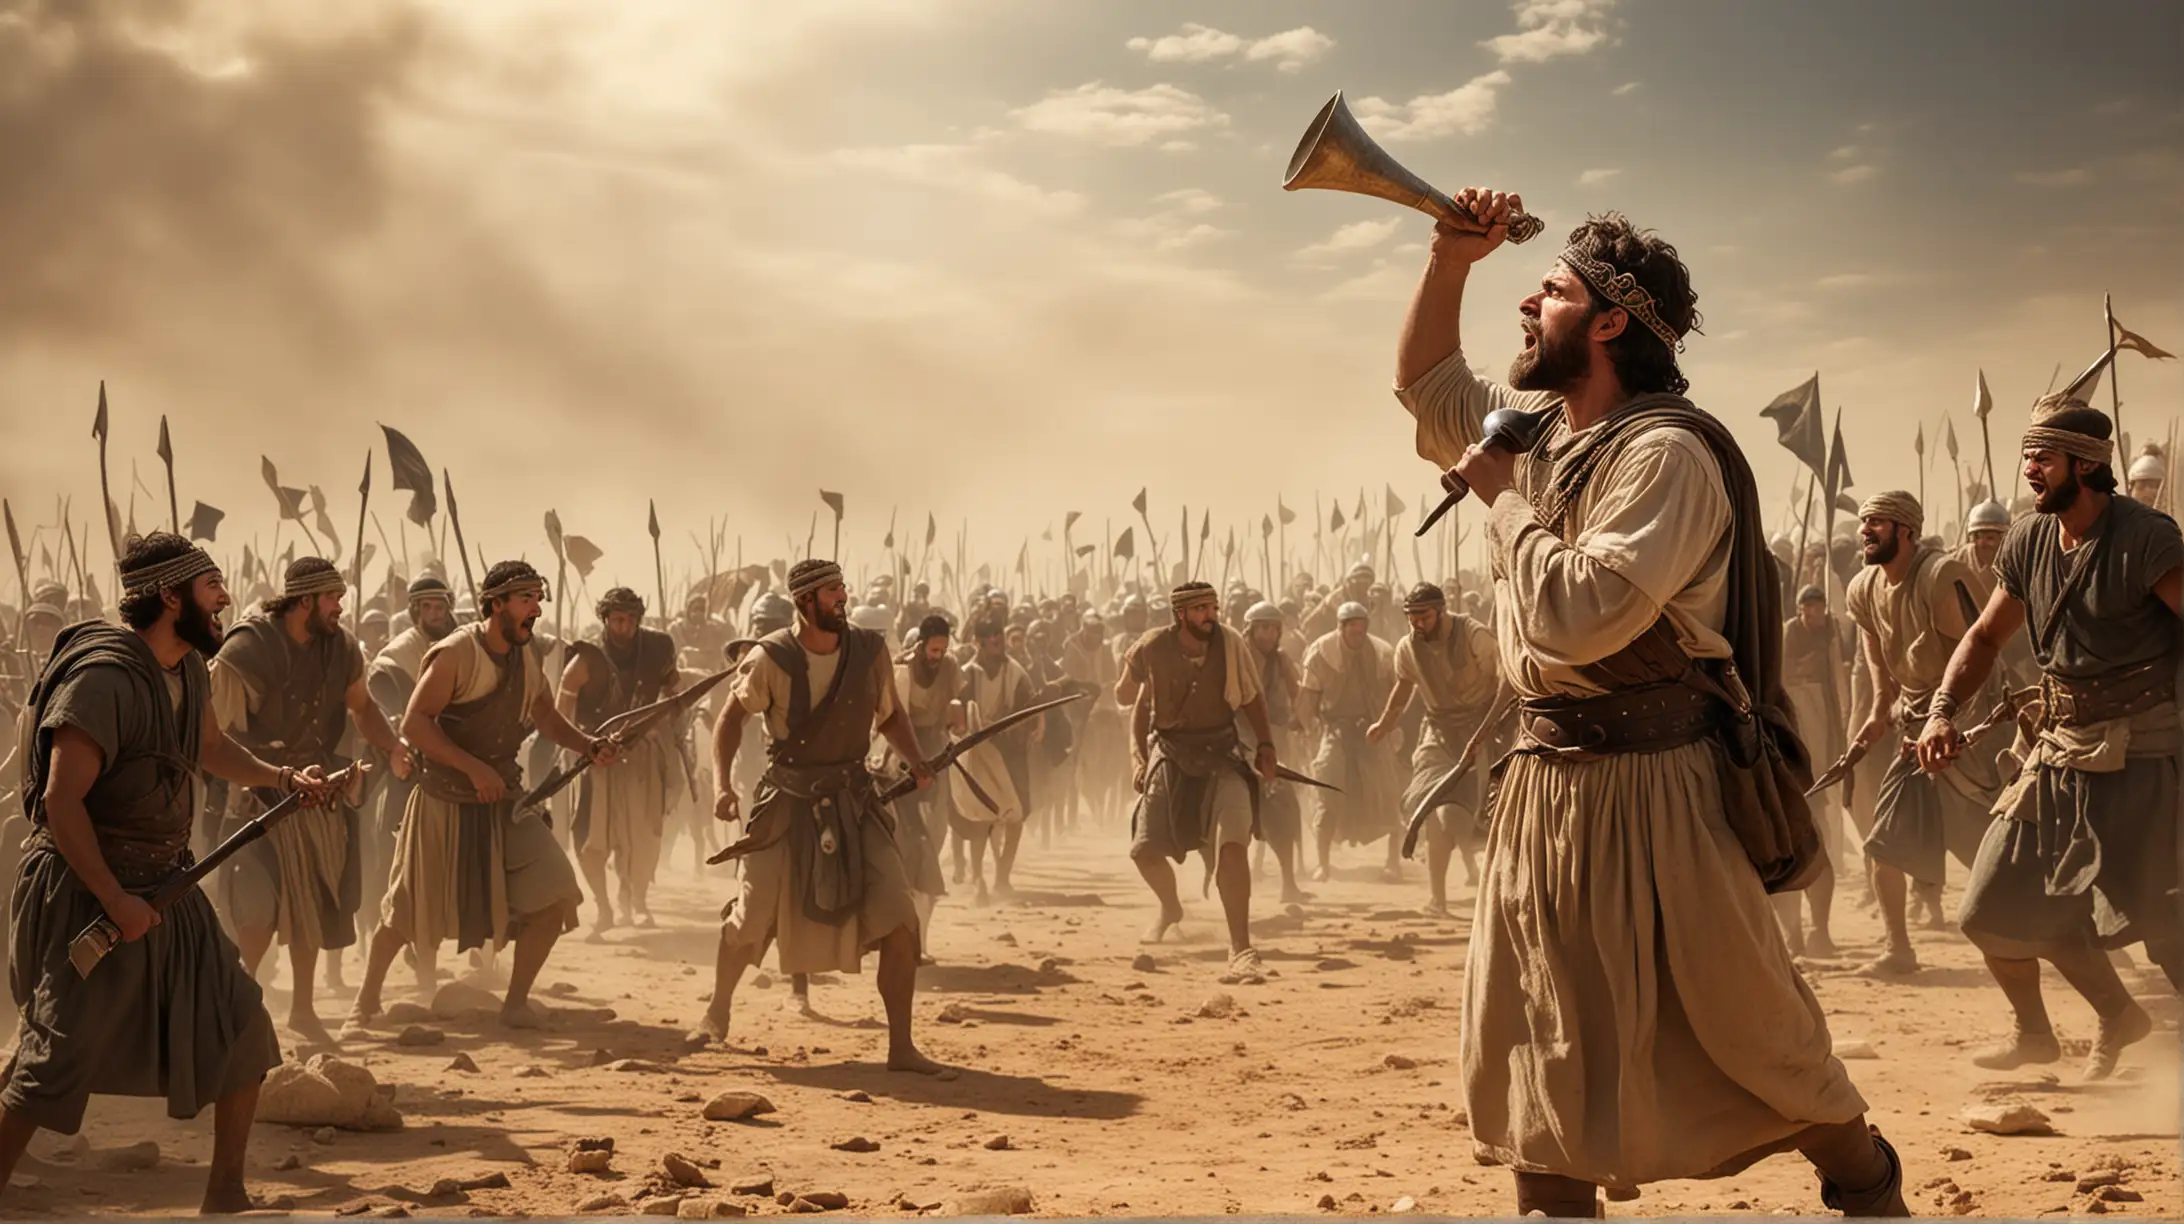 A battle scene set in the era of the Biblical Joshua. A man blows a horn to signal to his men to attack. Set in the Middle East during the Biblical era.